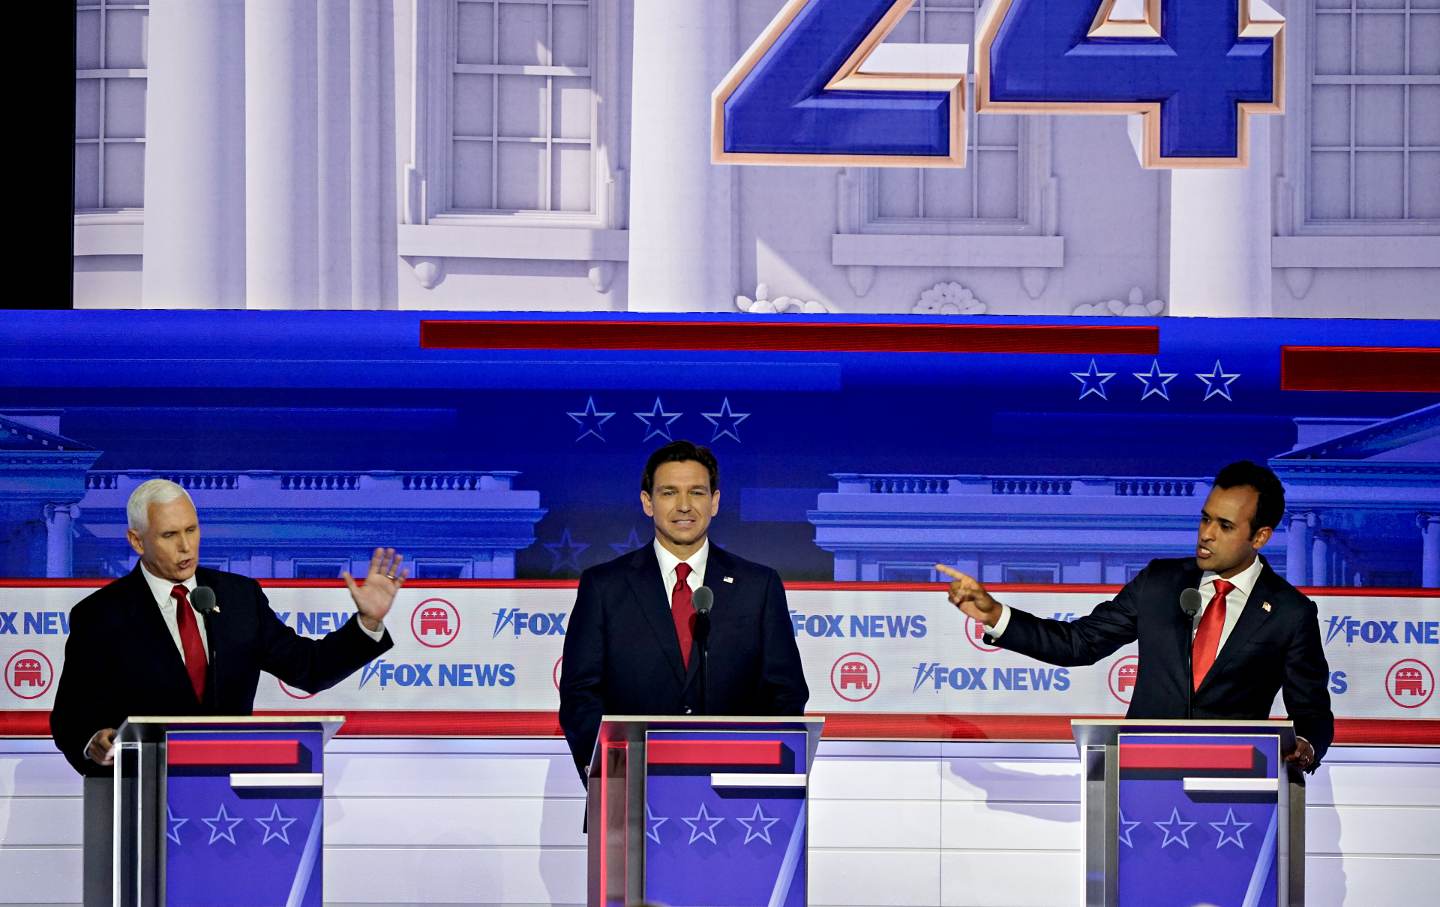 Mike Pence, Ron DeSantis, and Vivek Ramaswamy at the first GOP 2024 presidential debate in Milwaukee on August 23, 2023.